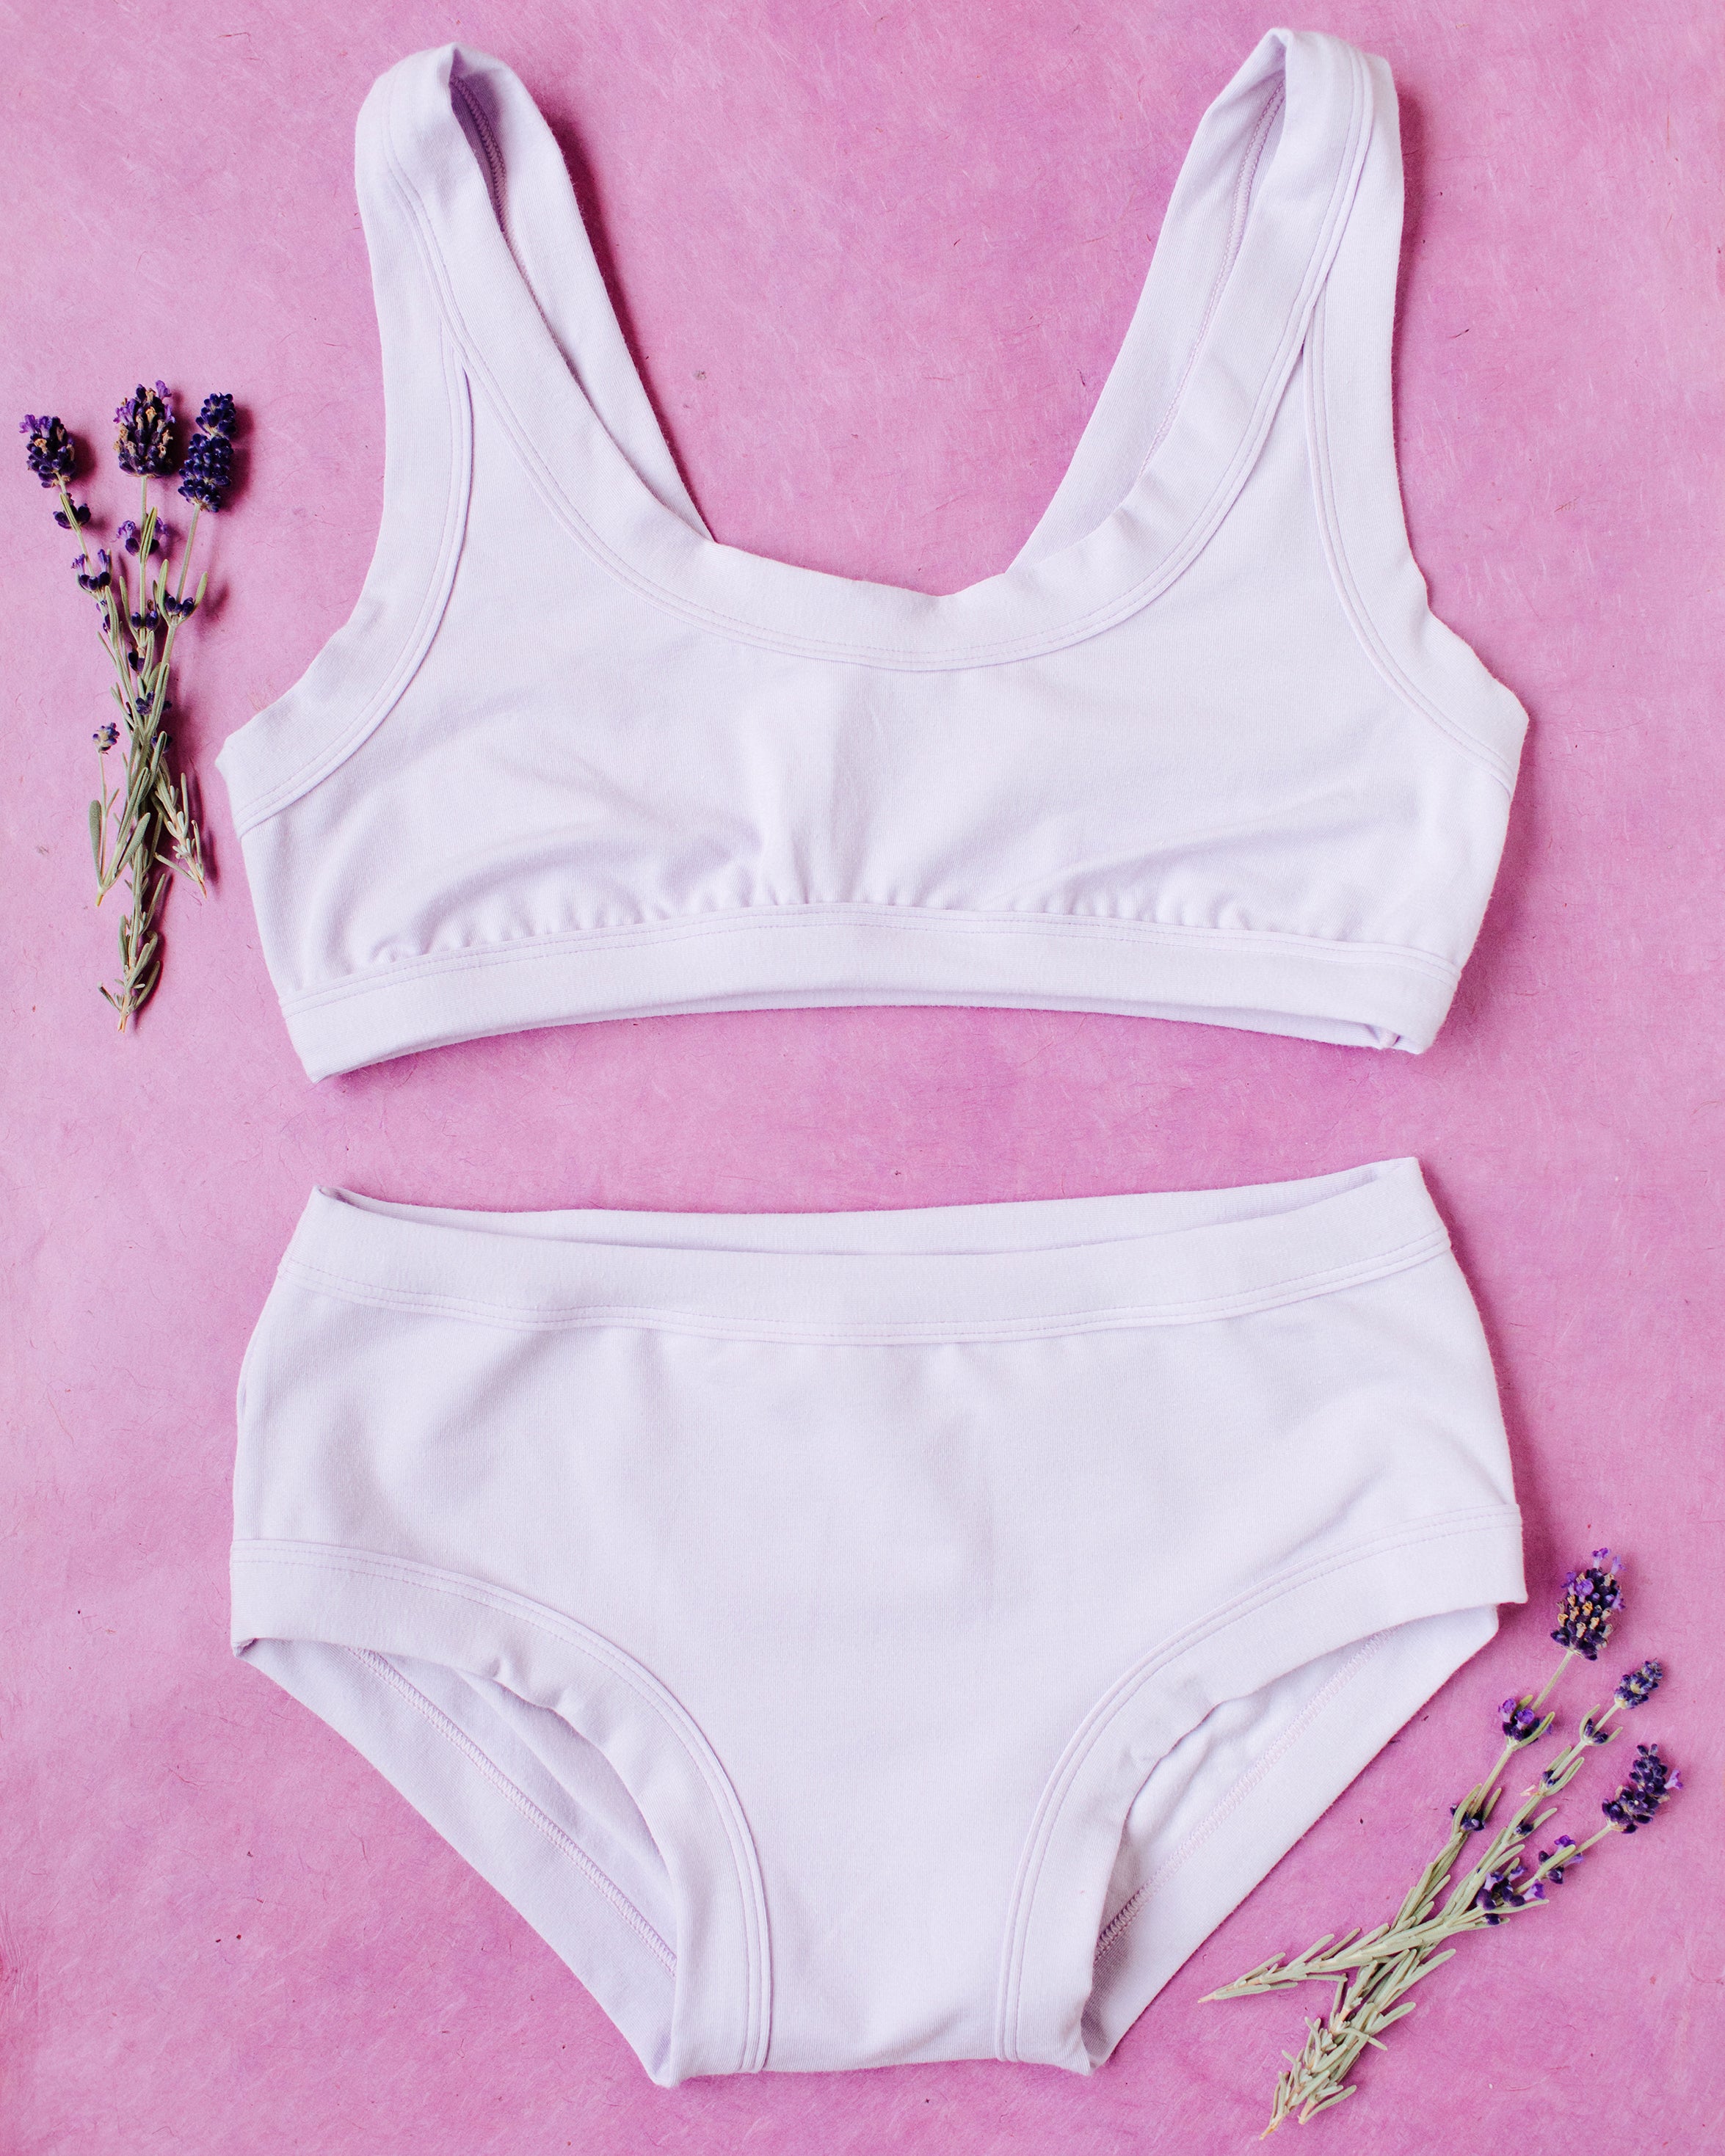 Flat lay of Light Lavender Hipster style underwear and Bralette on a purple surface with lavender sprigs.